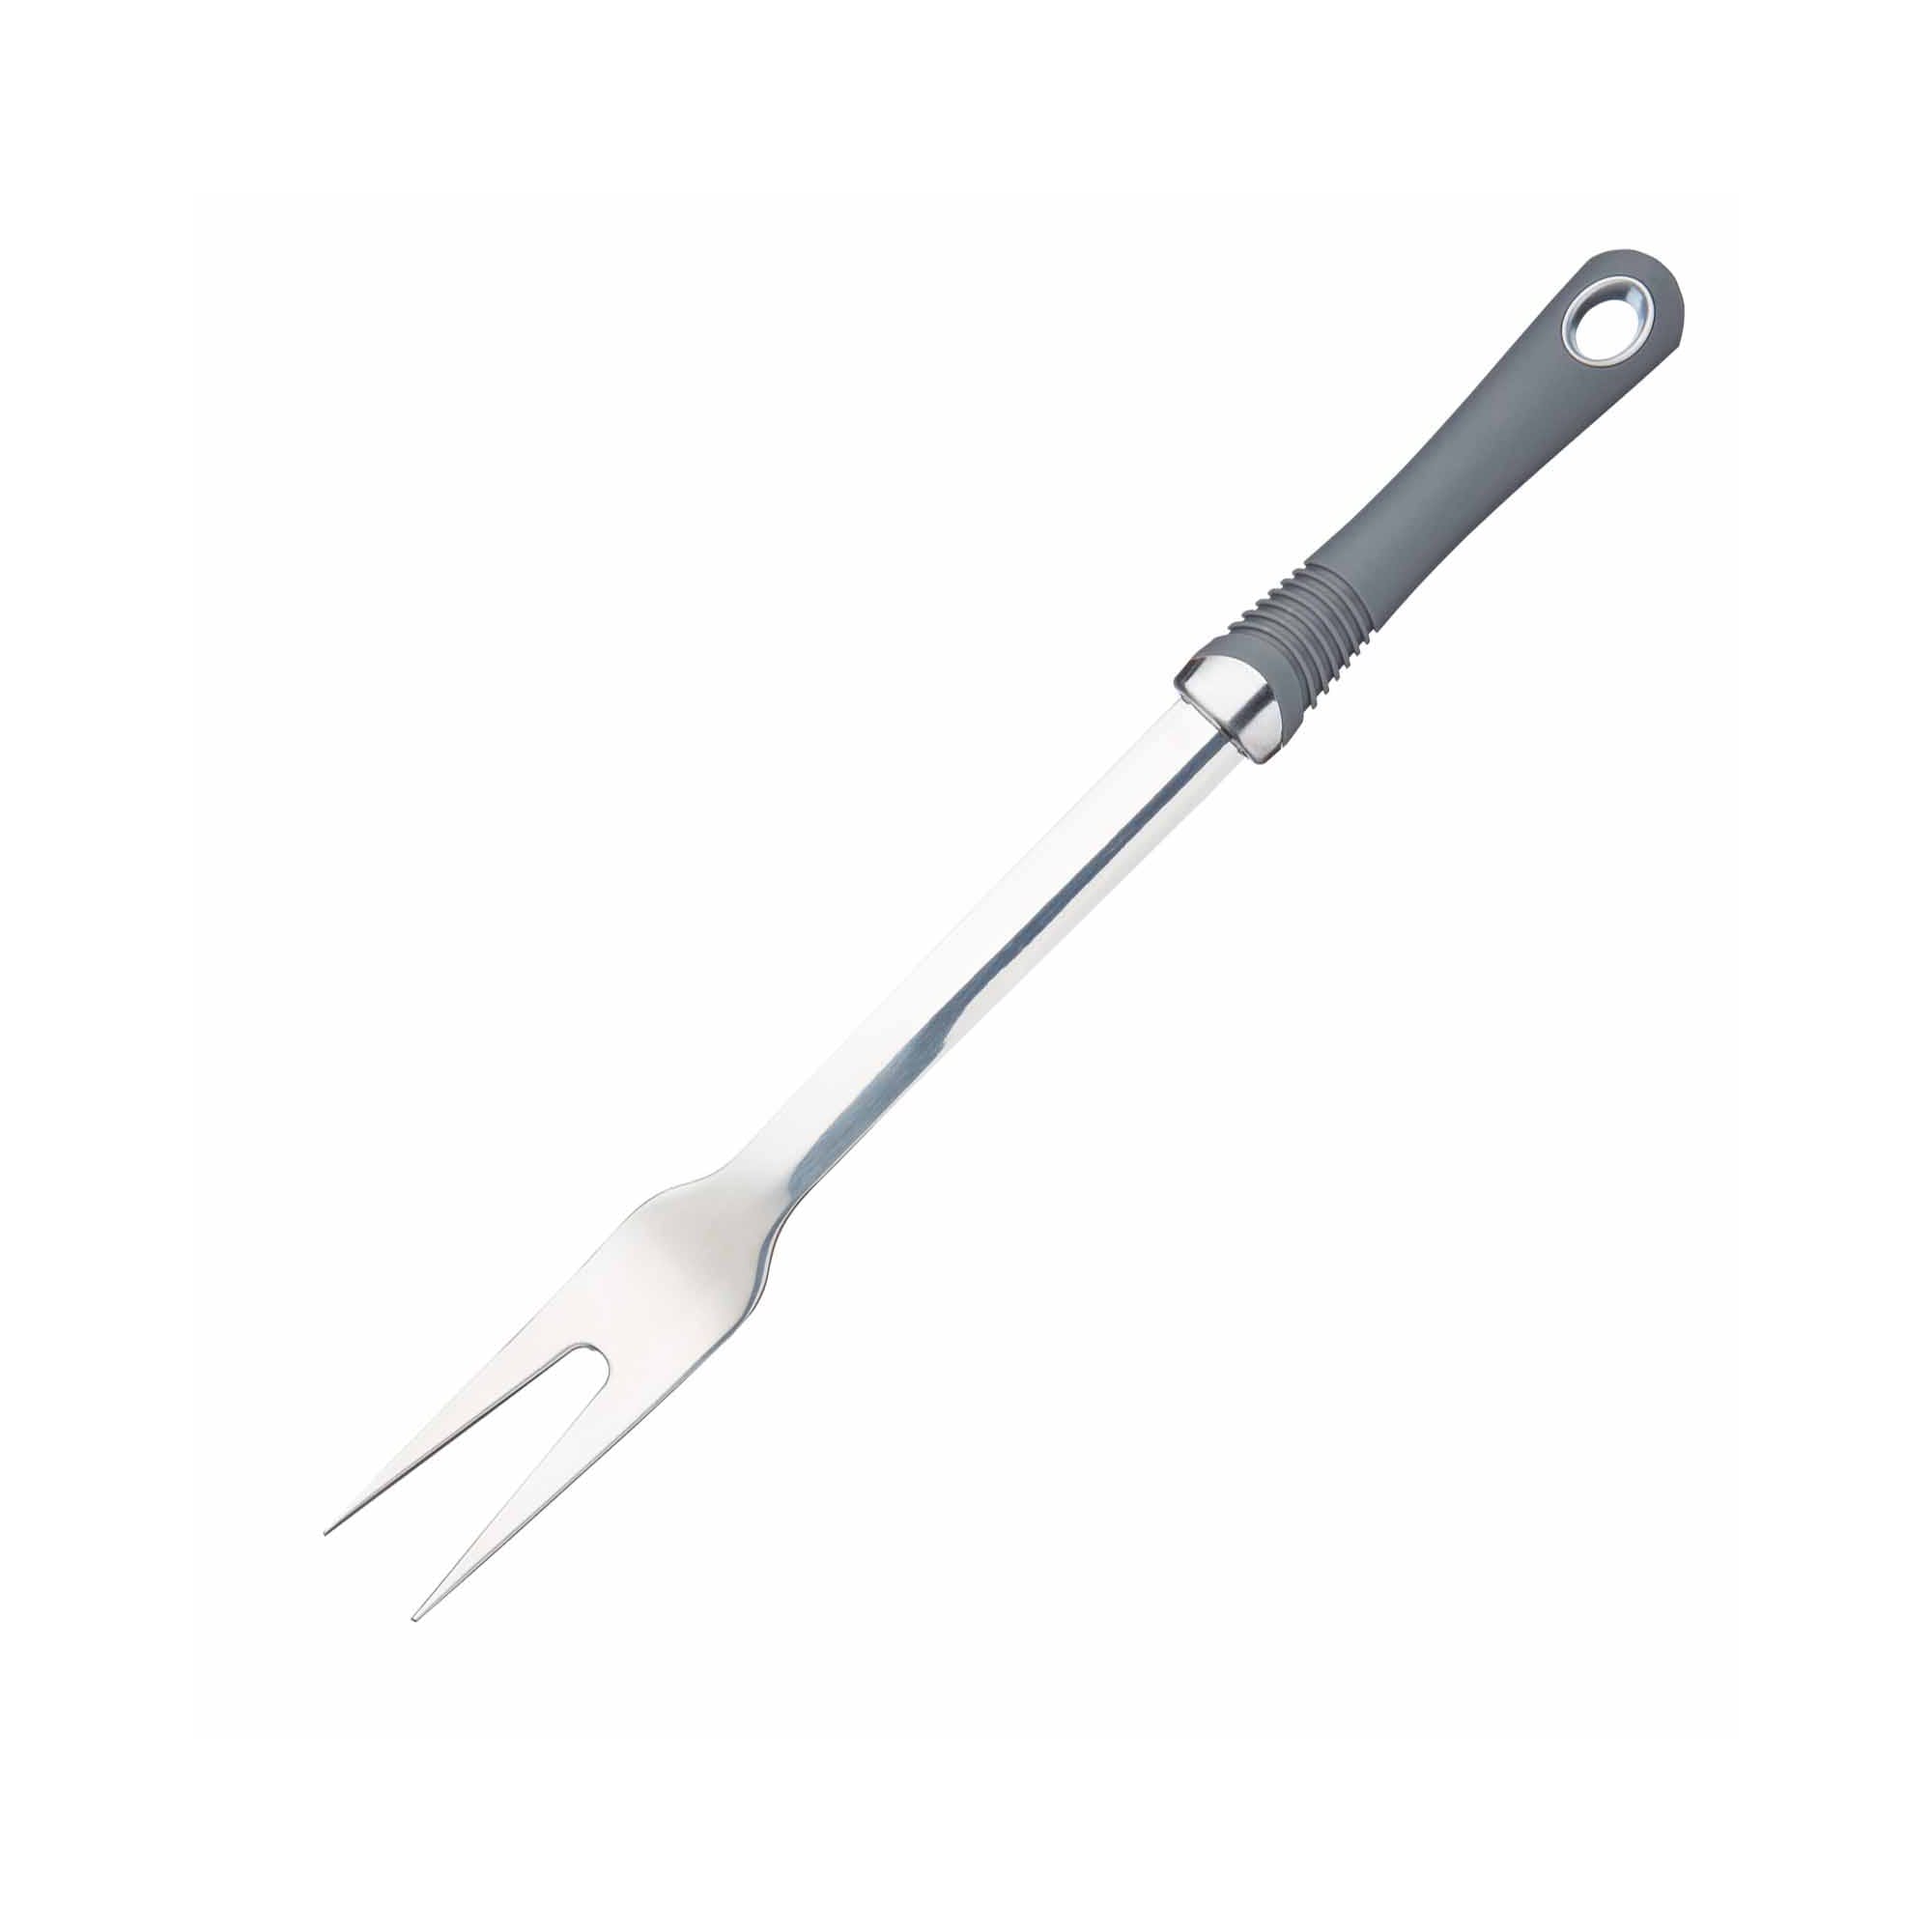 KitchenCraft Professional Meat Carving Fork with Soft-Grip Handle - The Cooks Cupboard Ltd